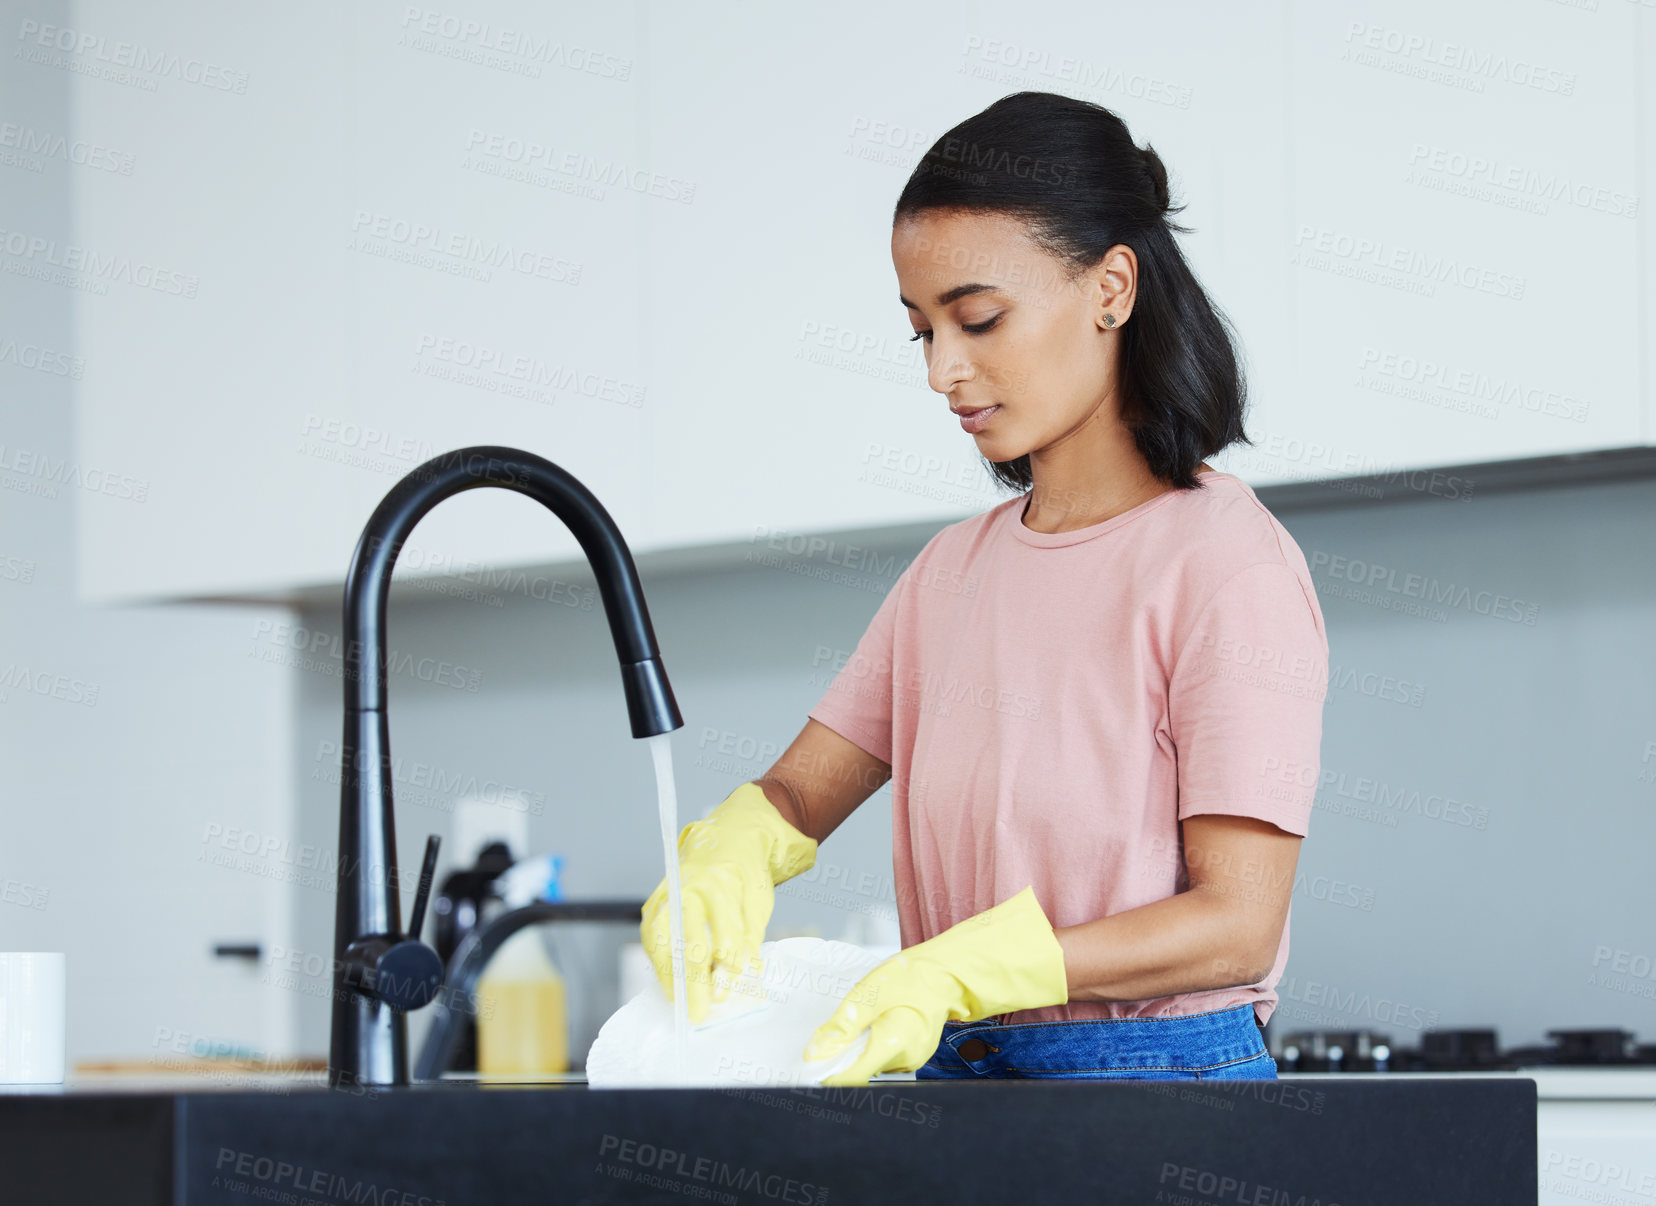 Buy stock photo Washing plate, water and woman in kitchen with soap for dirt, cleaning service and remove bacteria. Female cleaner or worker, liquid and hands with porcelain by sink for virus safety, health and tap